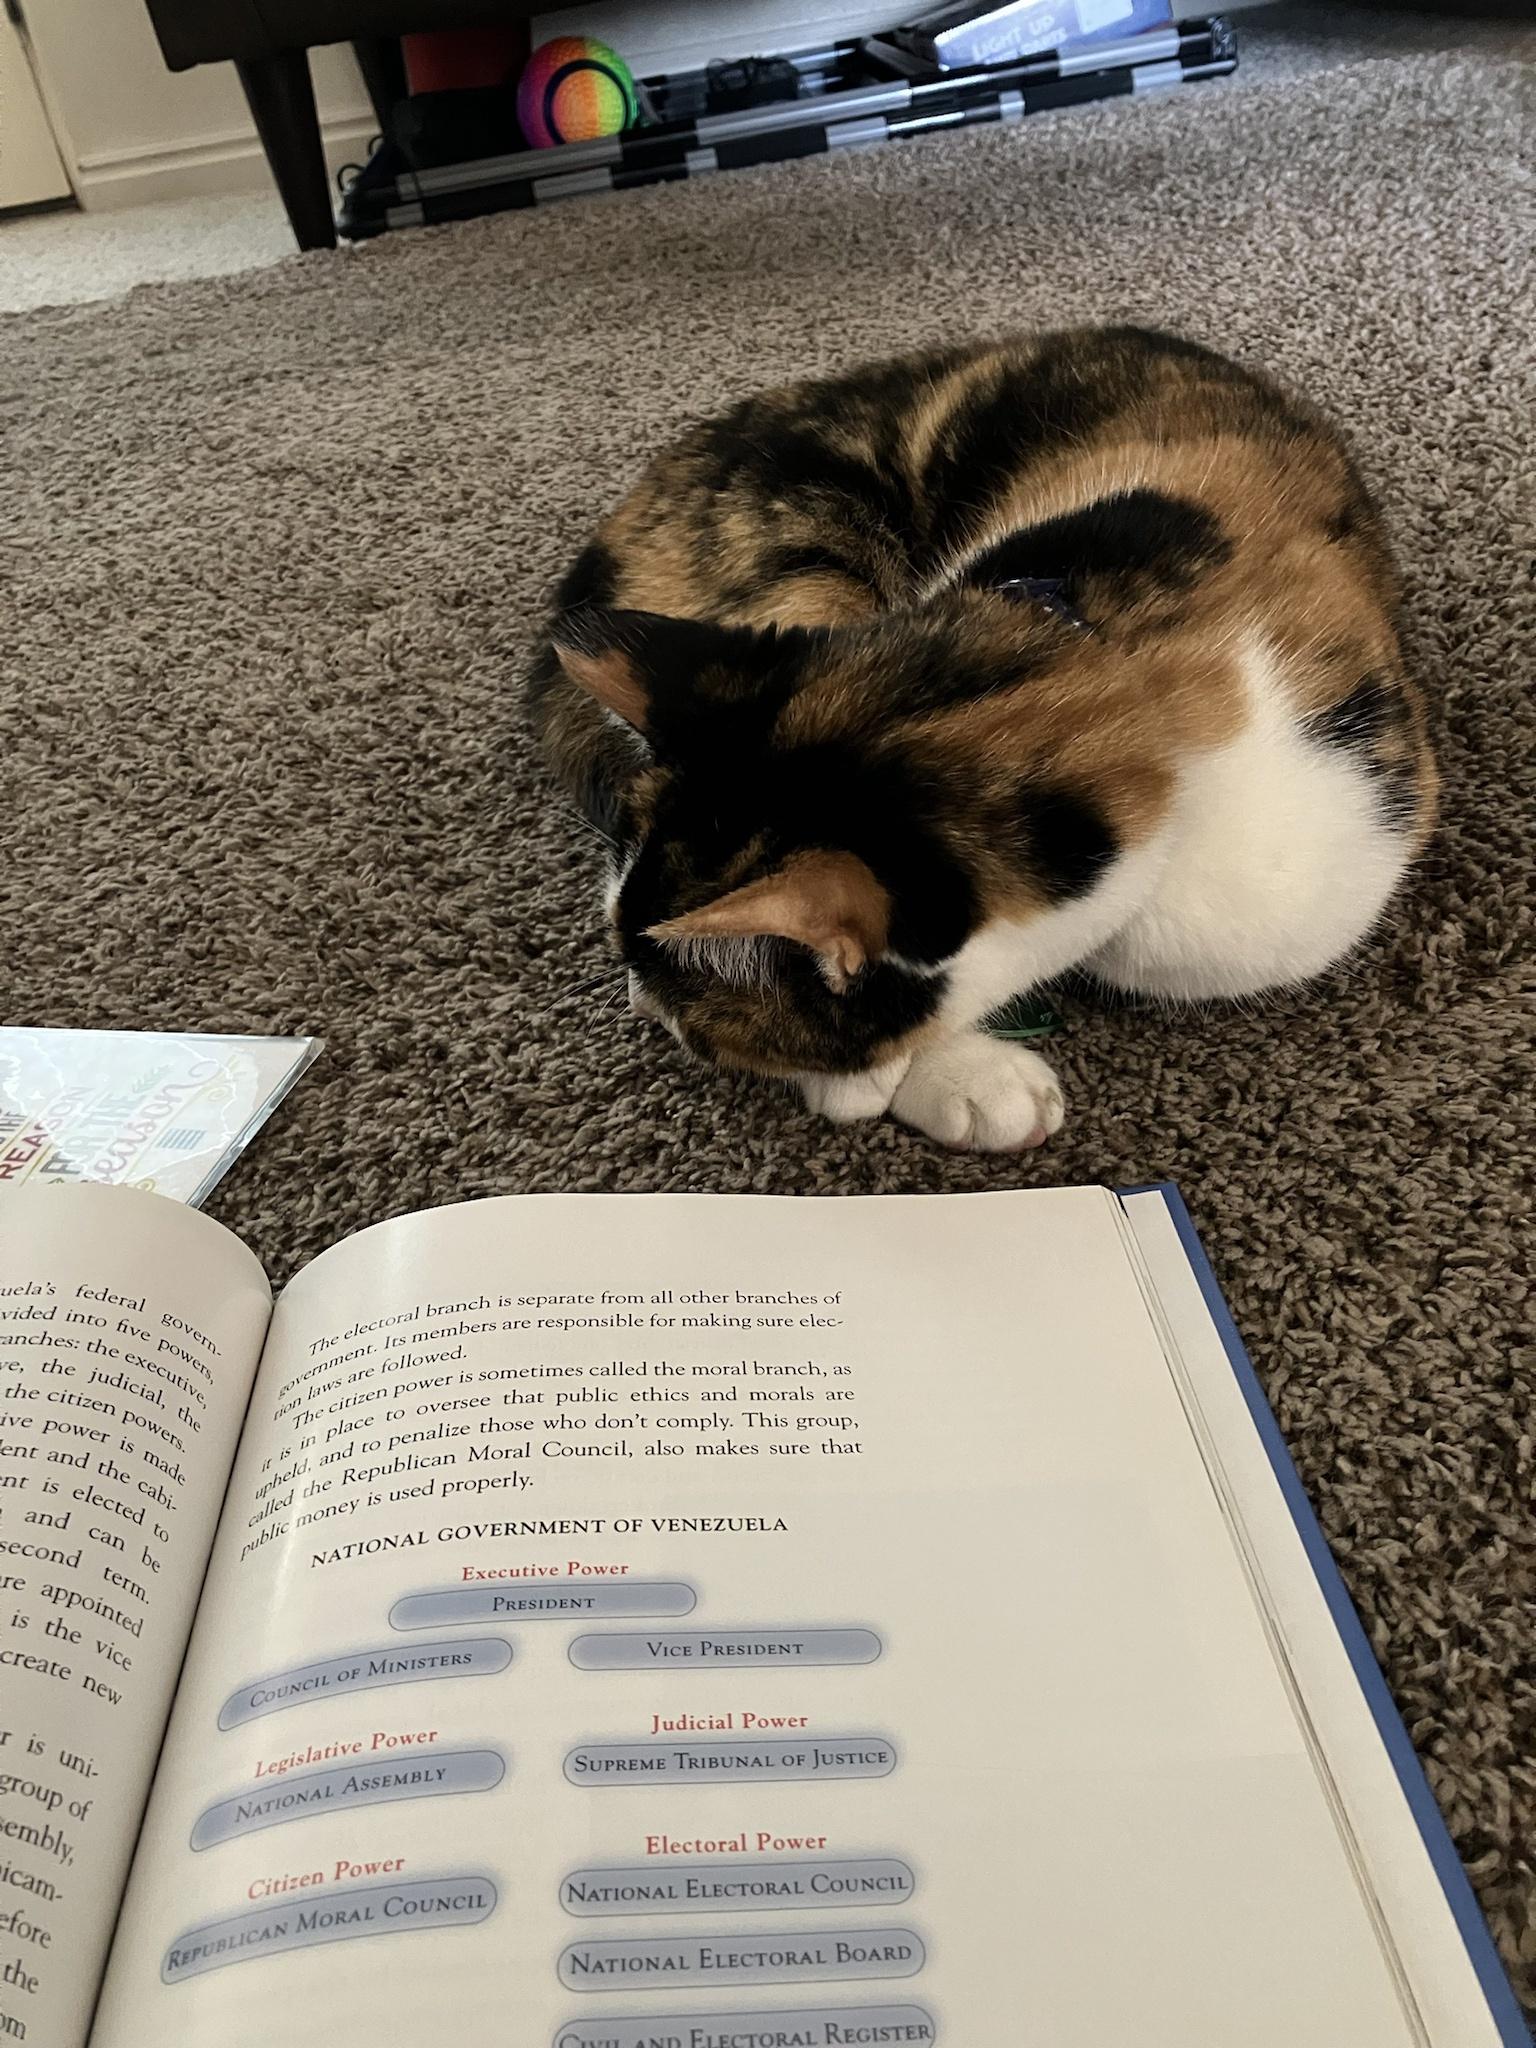 My cat helping me learn